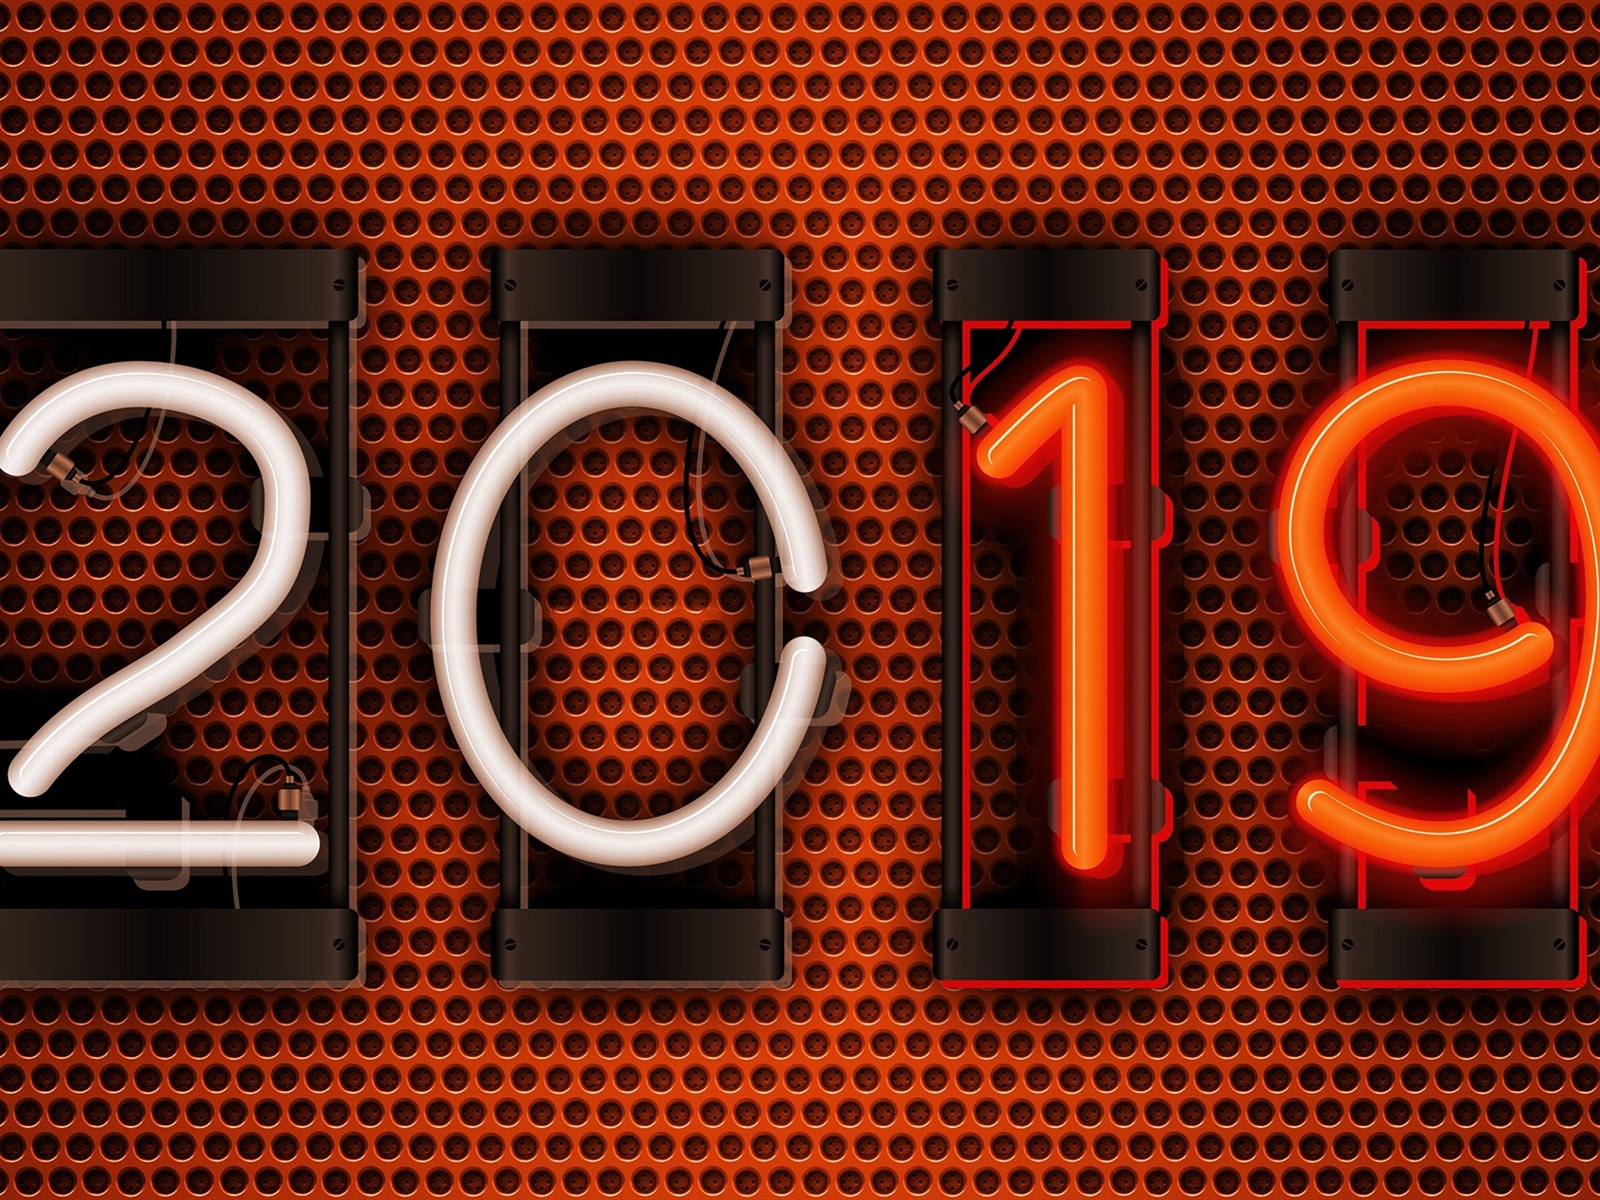 Happy New Year 2019 HD wallpapers #3 - 1600x1200